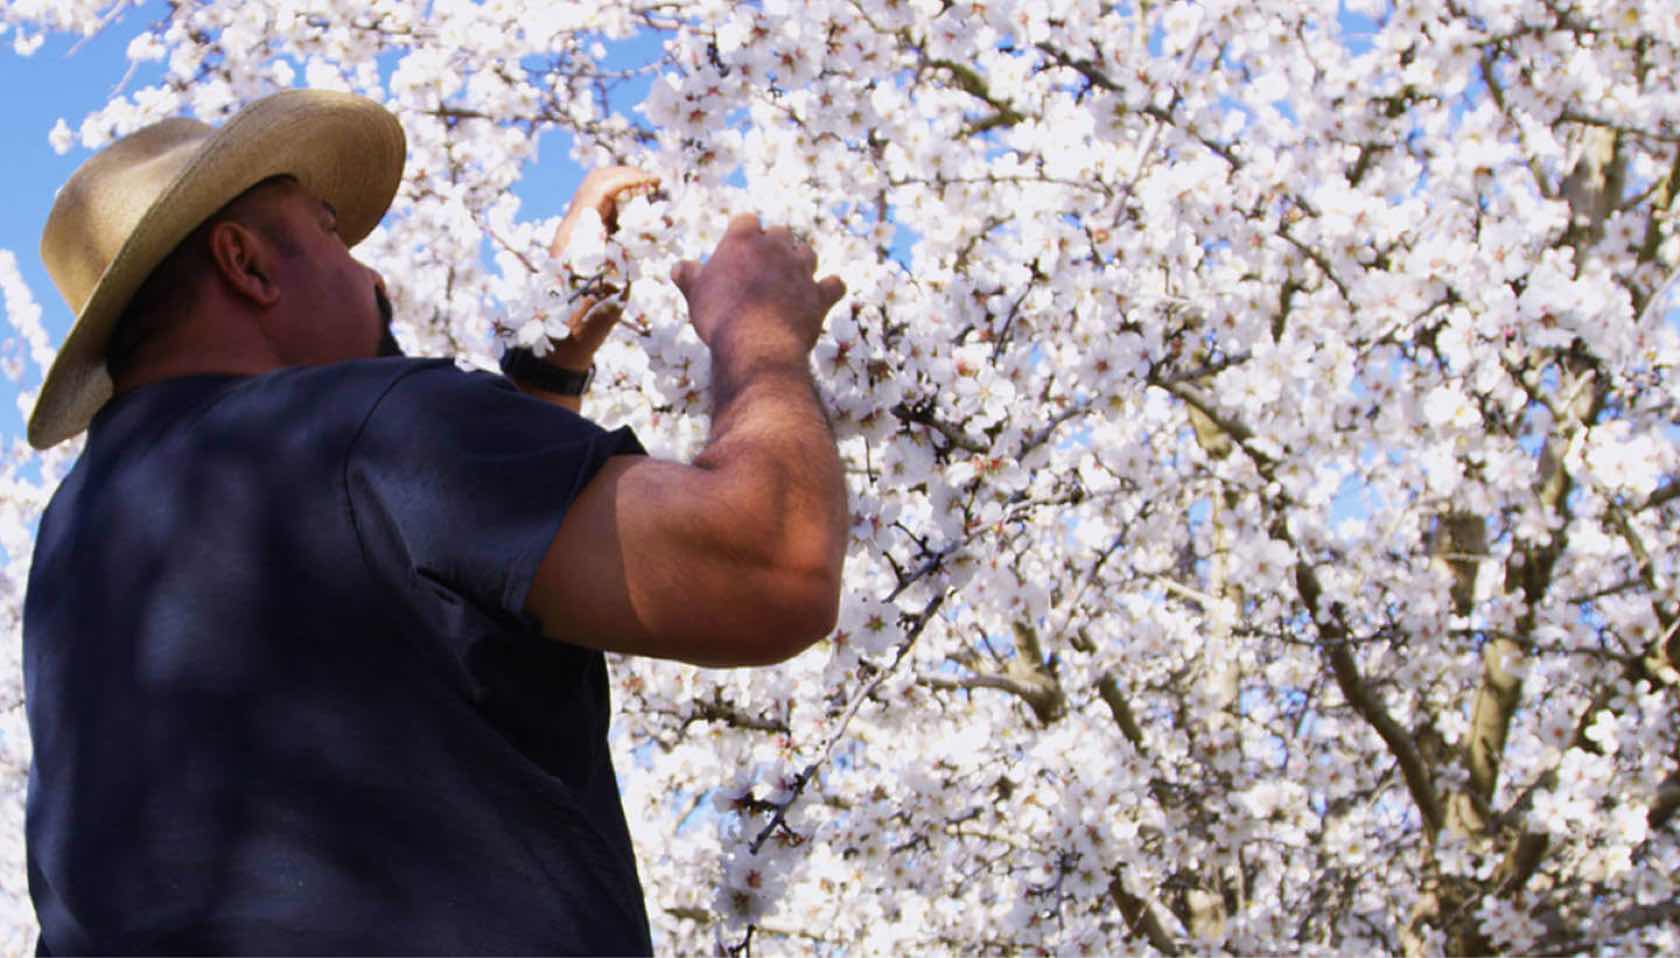 A man tending to white flowers on an almond tree